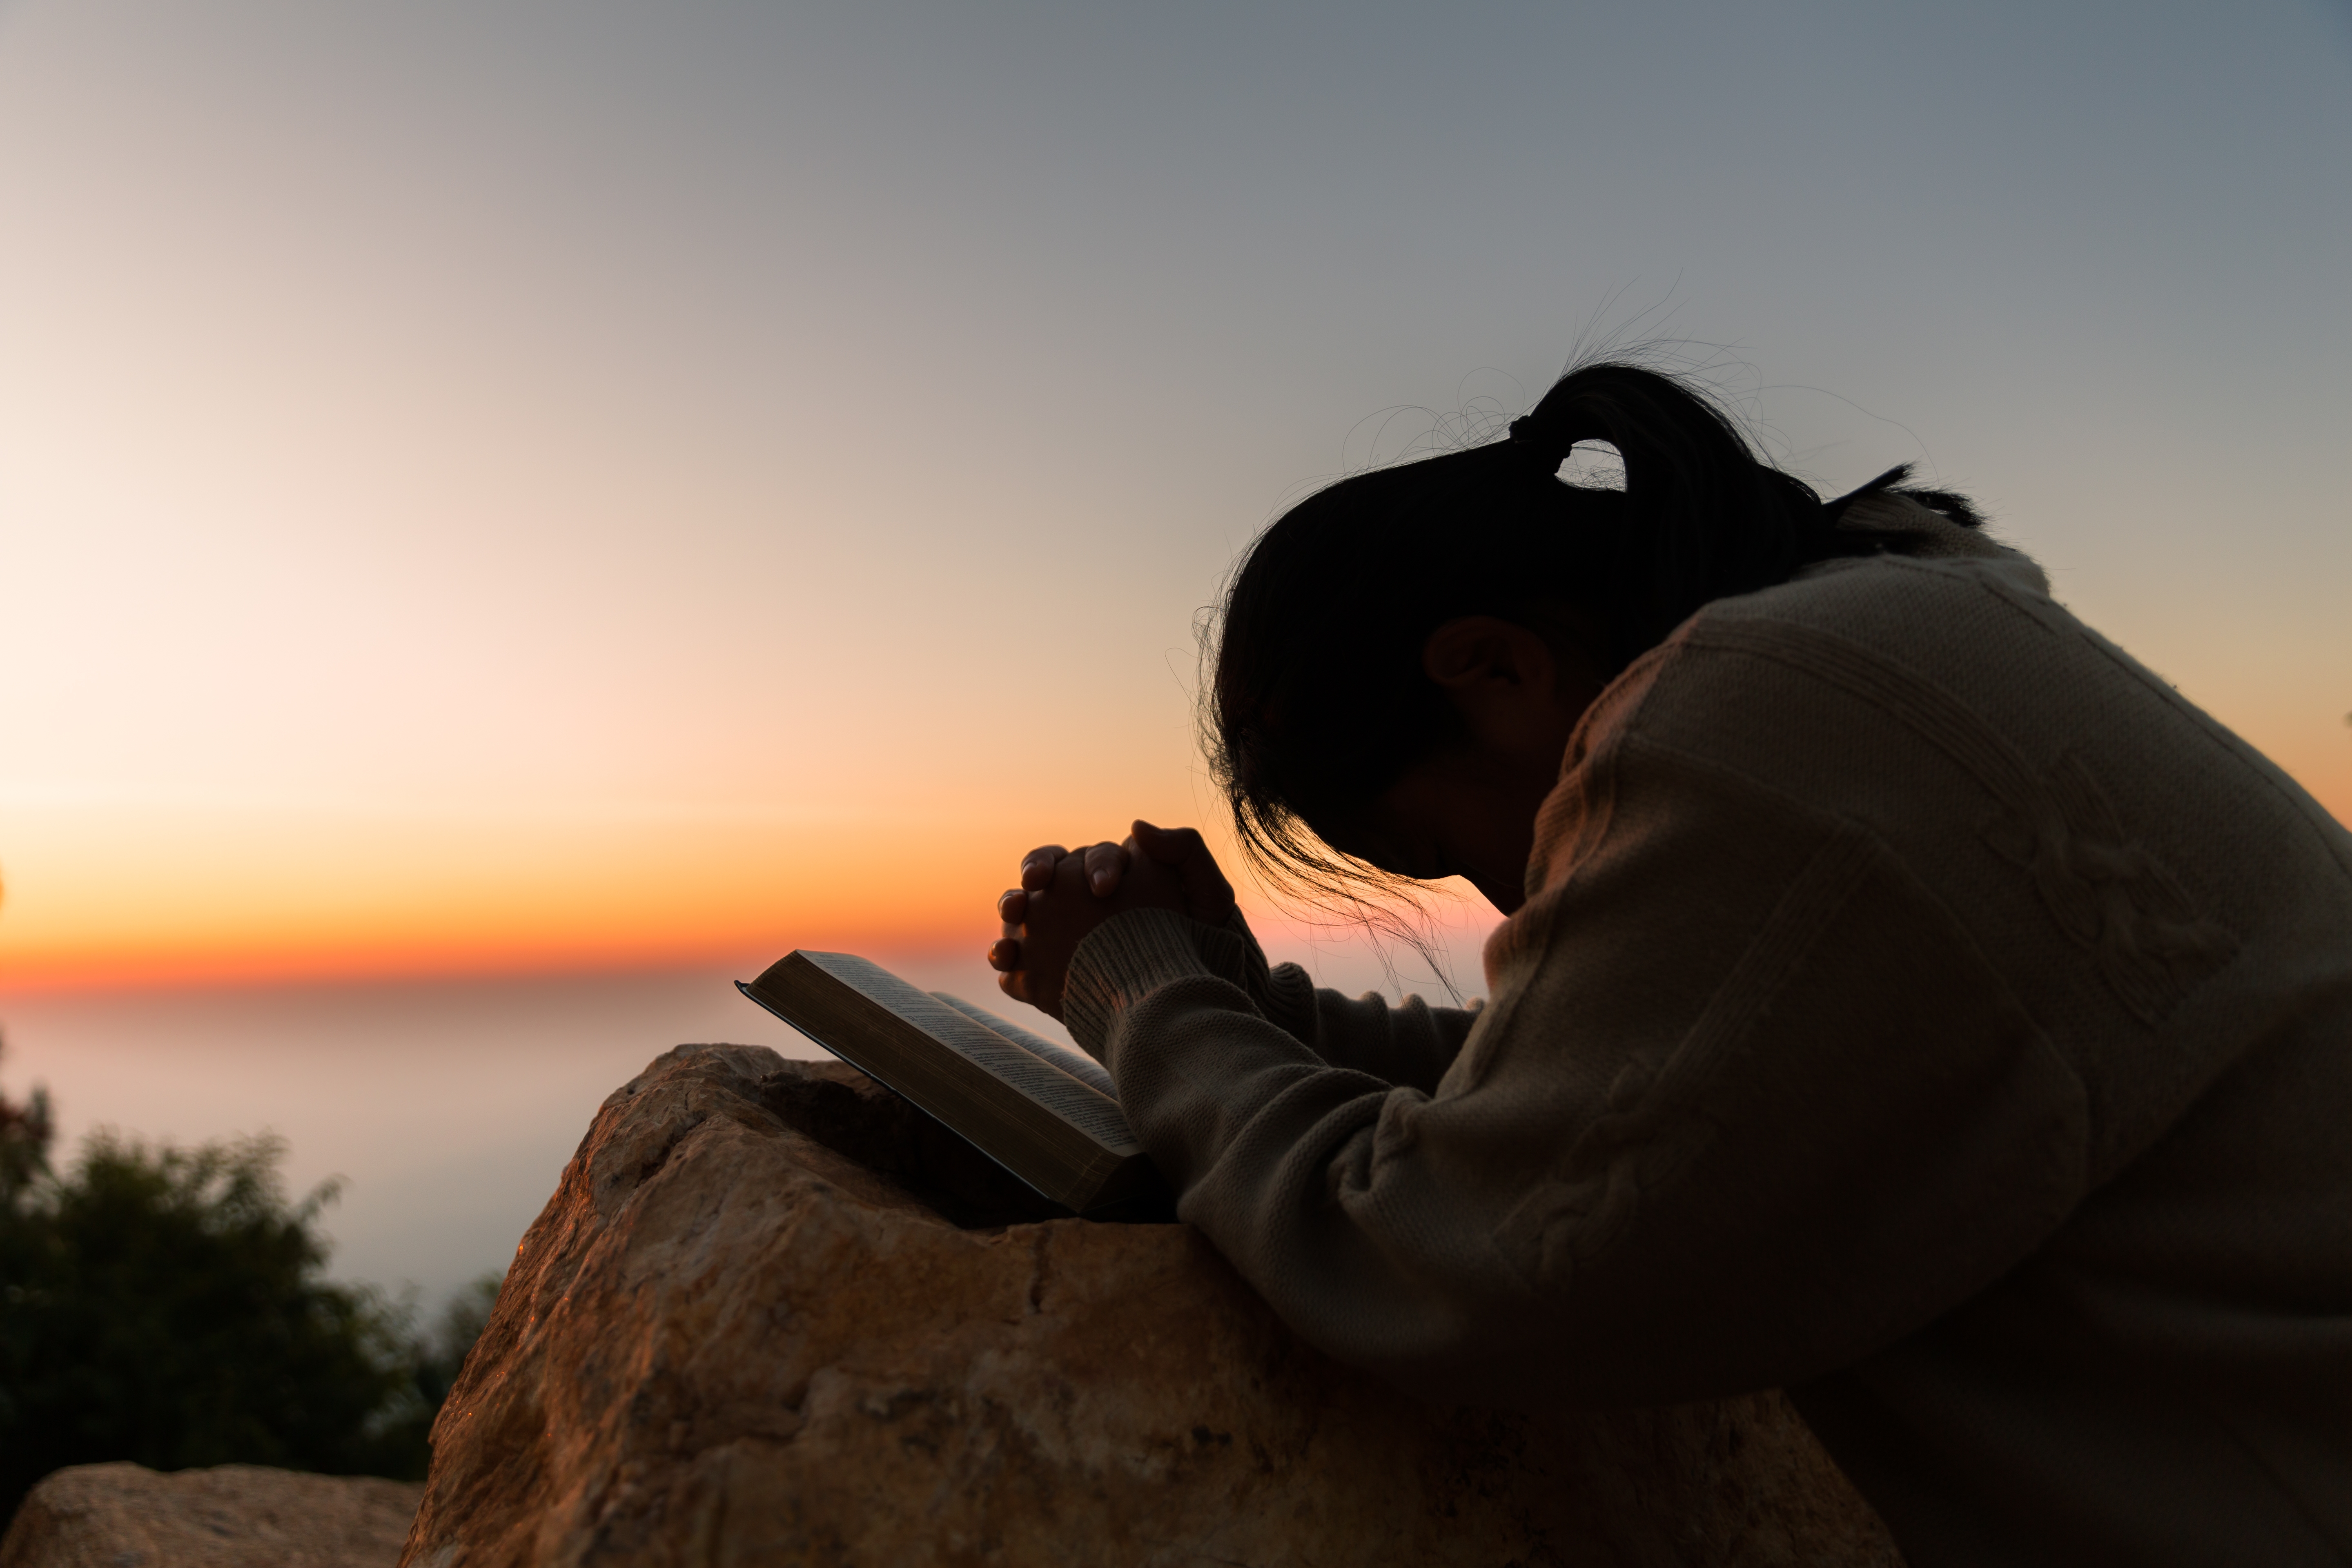 A woman praying in front of a sunset